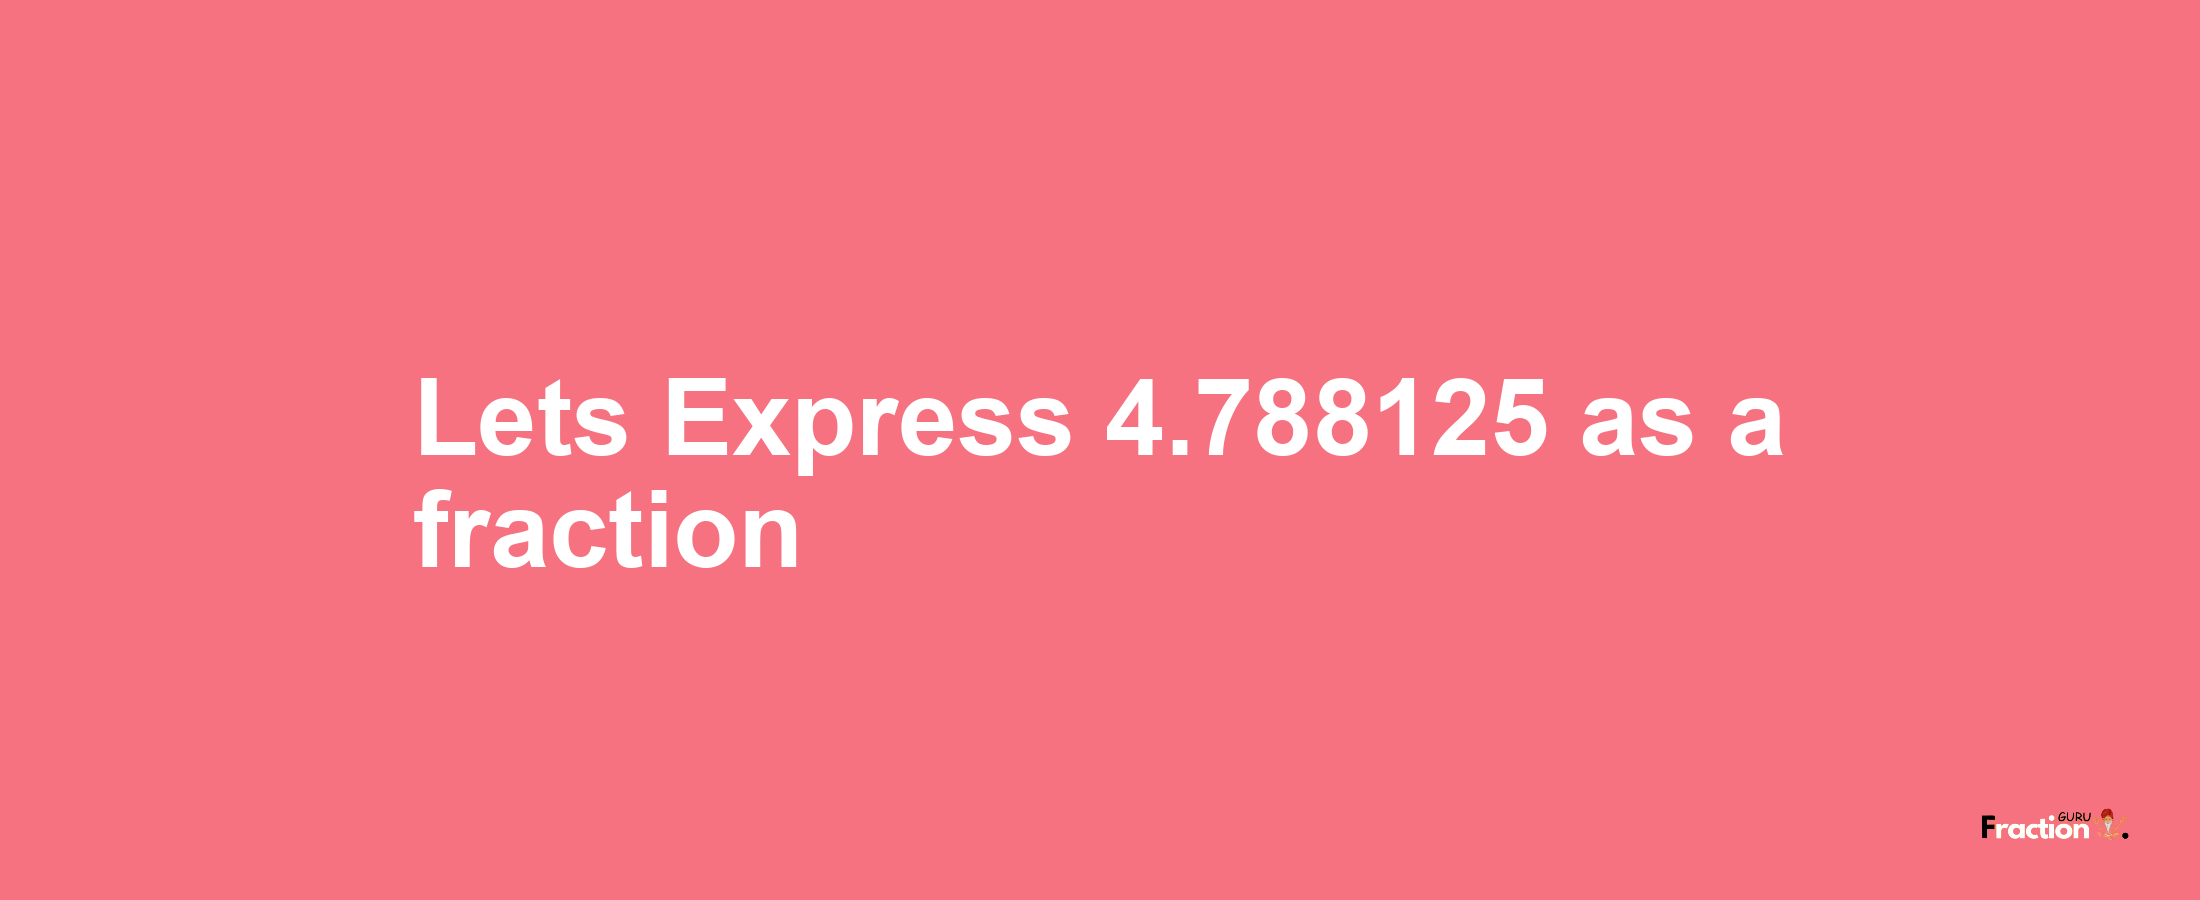 Lets Express 4.788125 as afraction